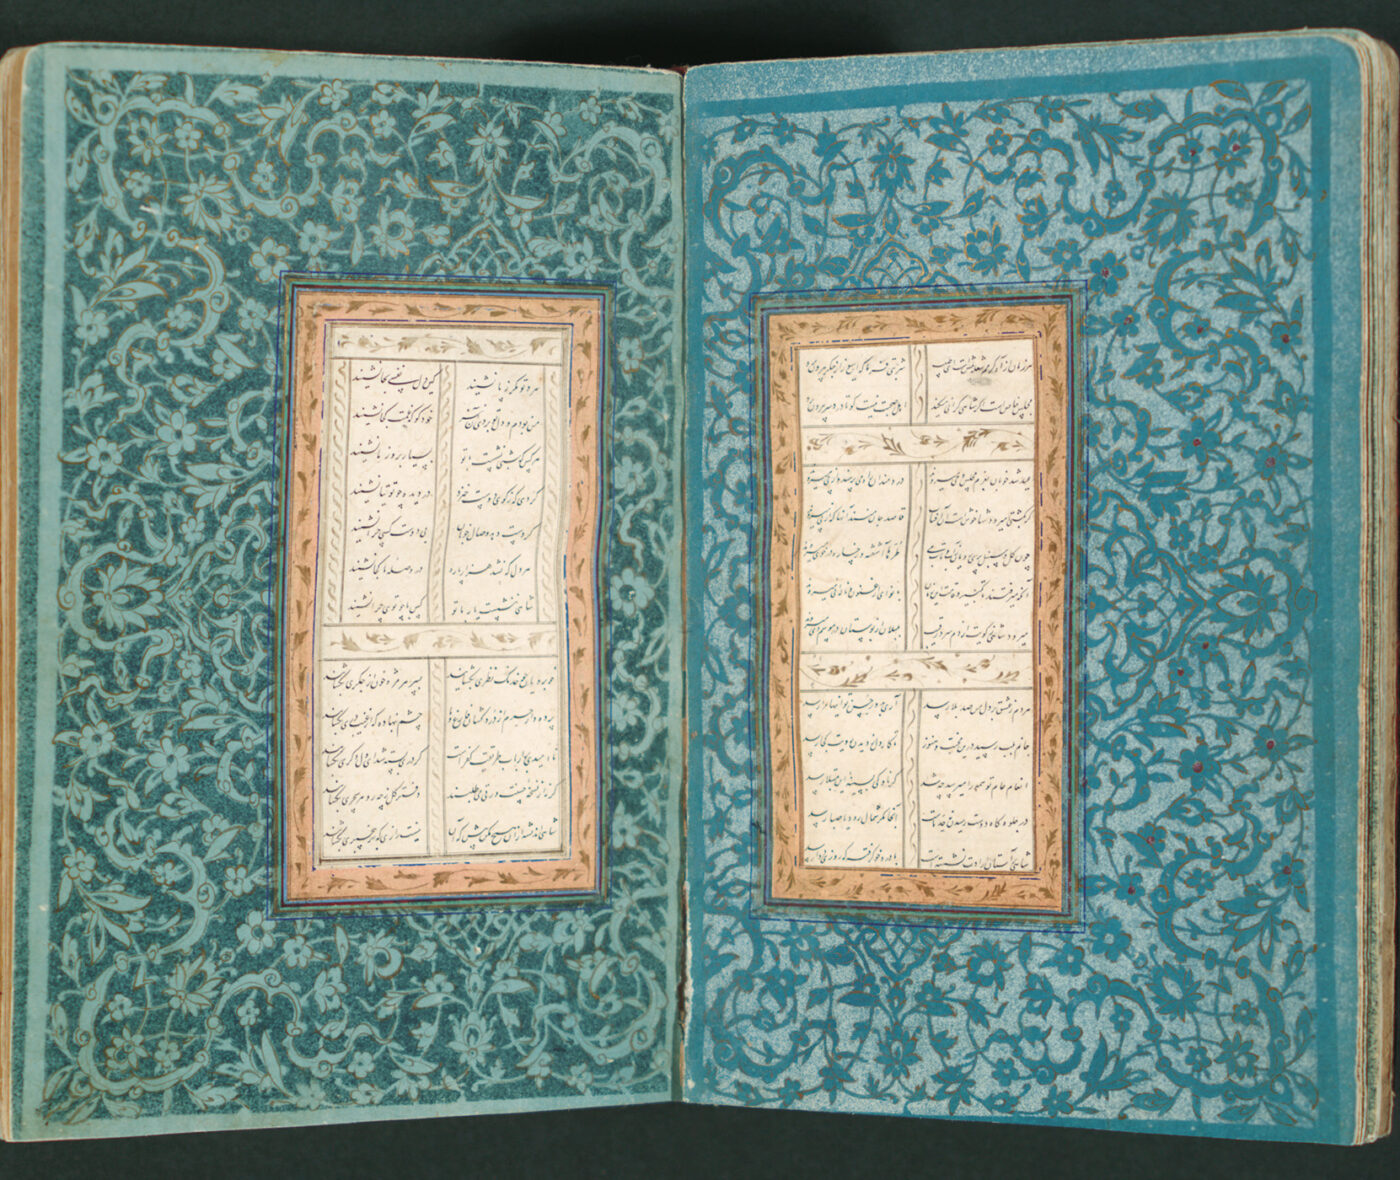 An open bound manuscript with Persian calligraphy and a floral design in blues and greens